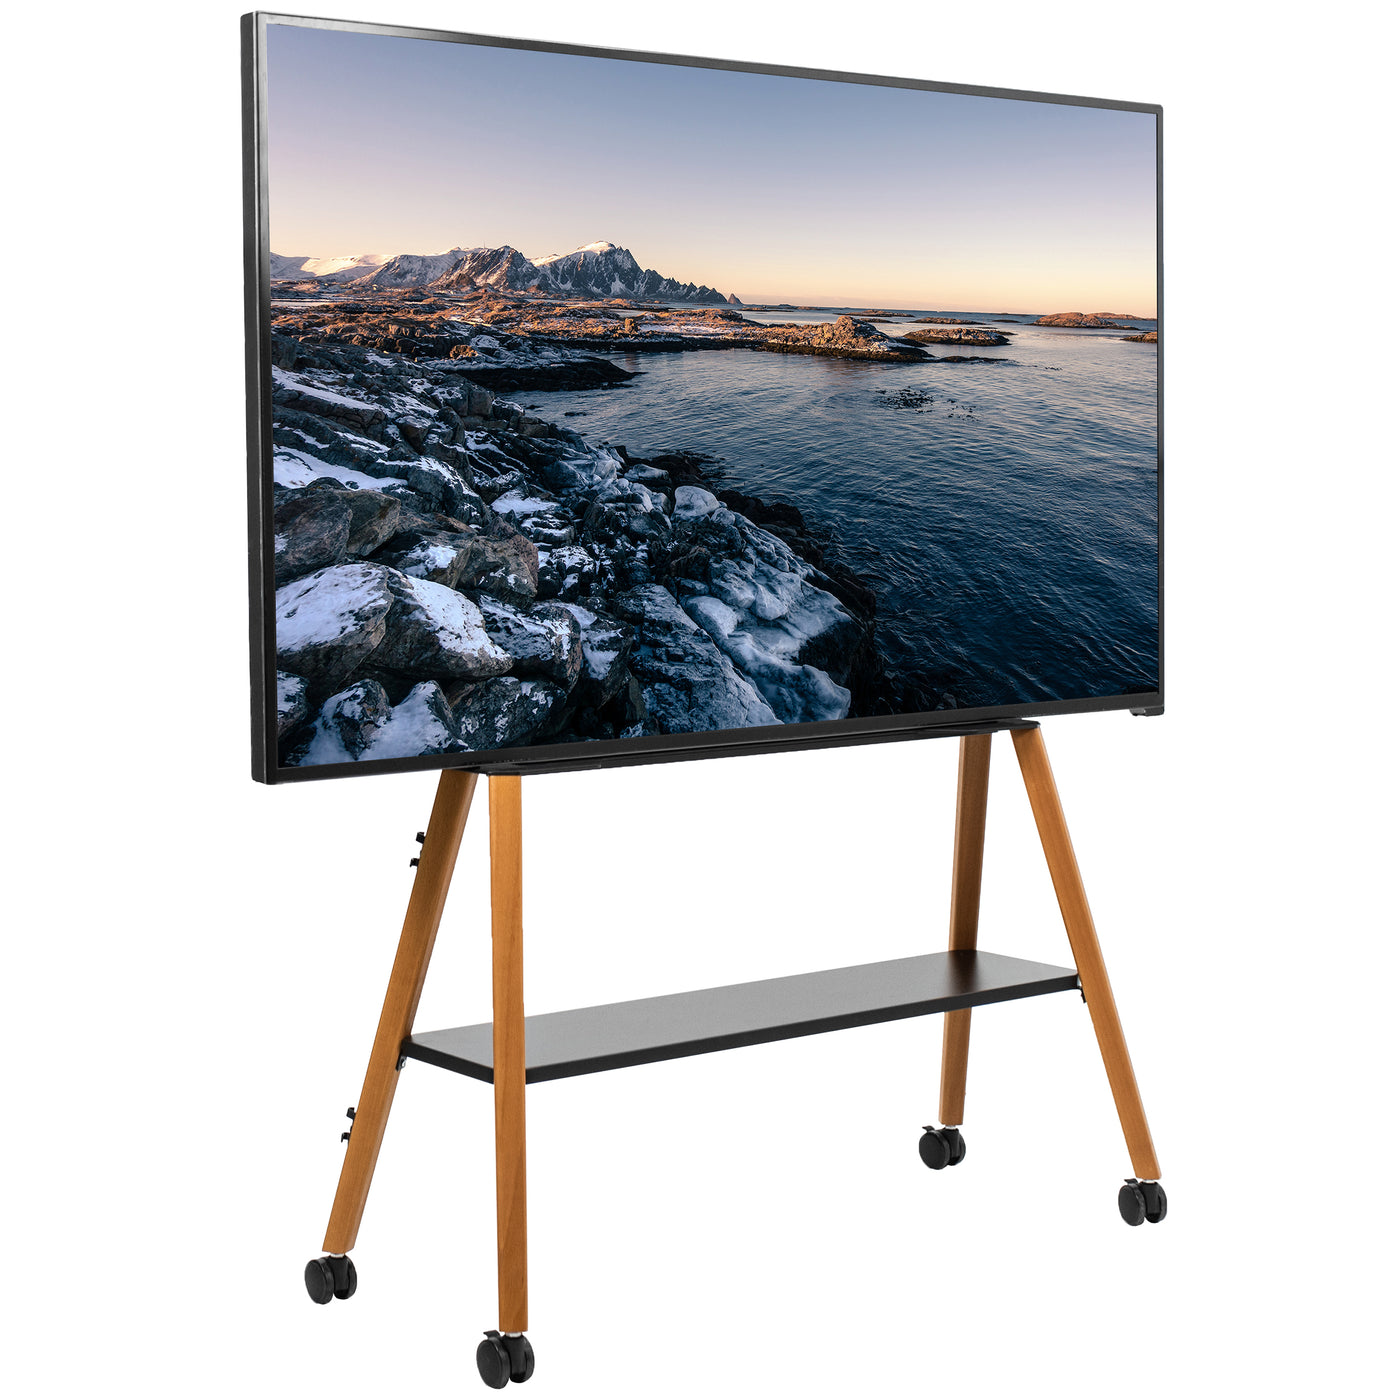 This rolling artistic easel 49 to 75 inch LED LCD screen mobile studio TV display stand is for home theatres, trade shows, schools, and more.